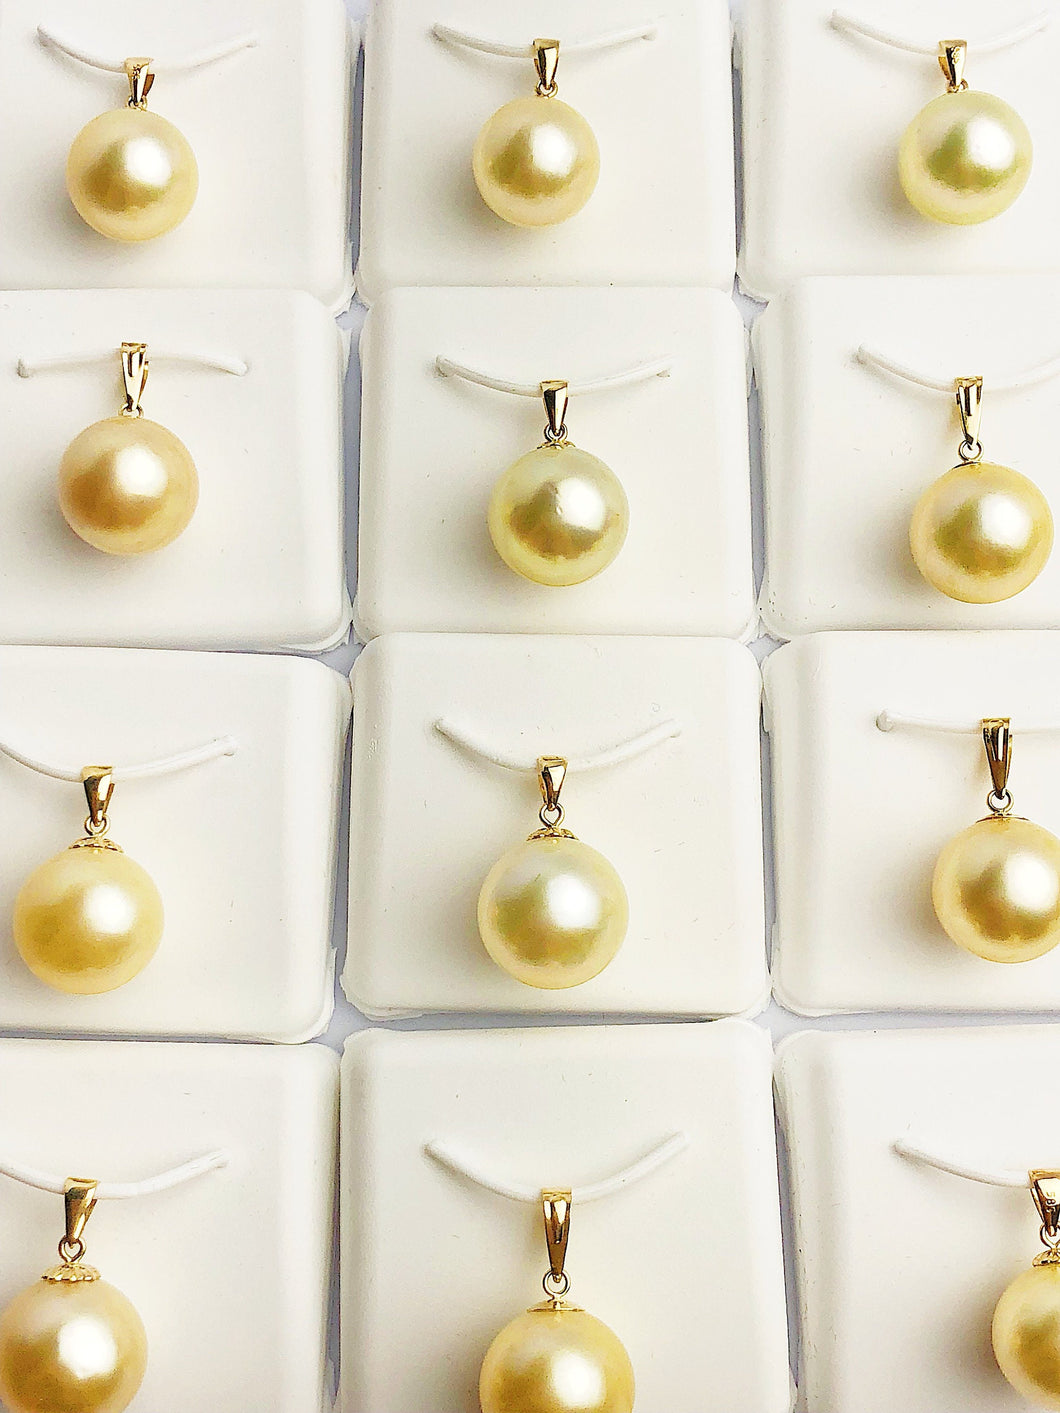 12-14mm AAA Quality South Sea Pearl Pendants on 14K Gold (452 - Size 12, 13, 14mm)